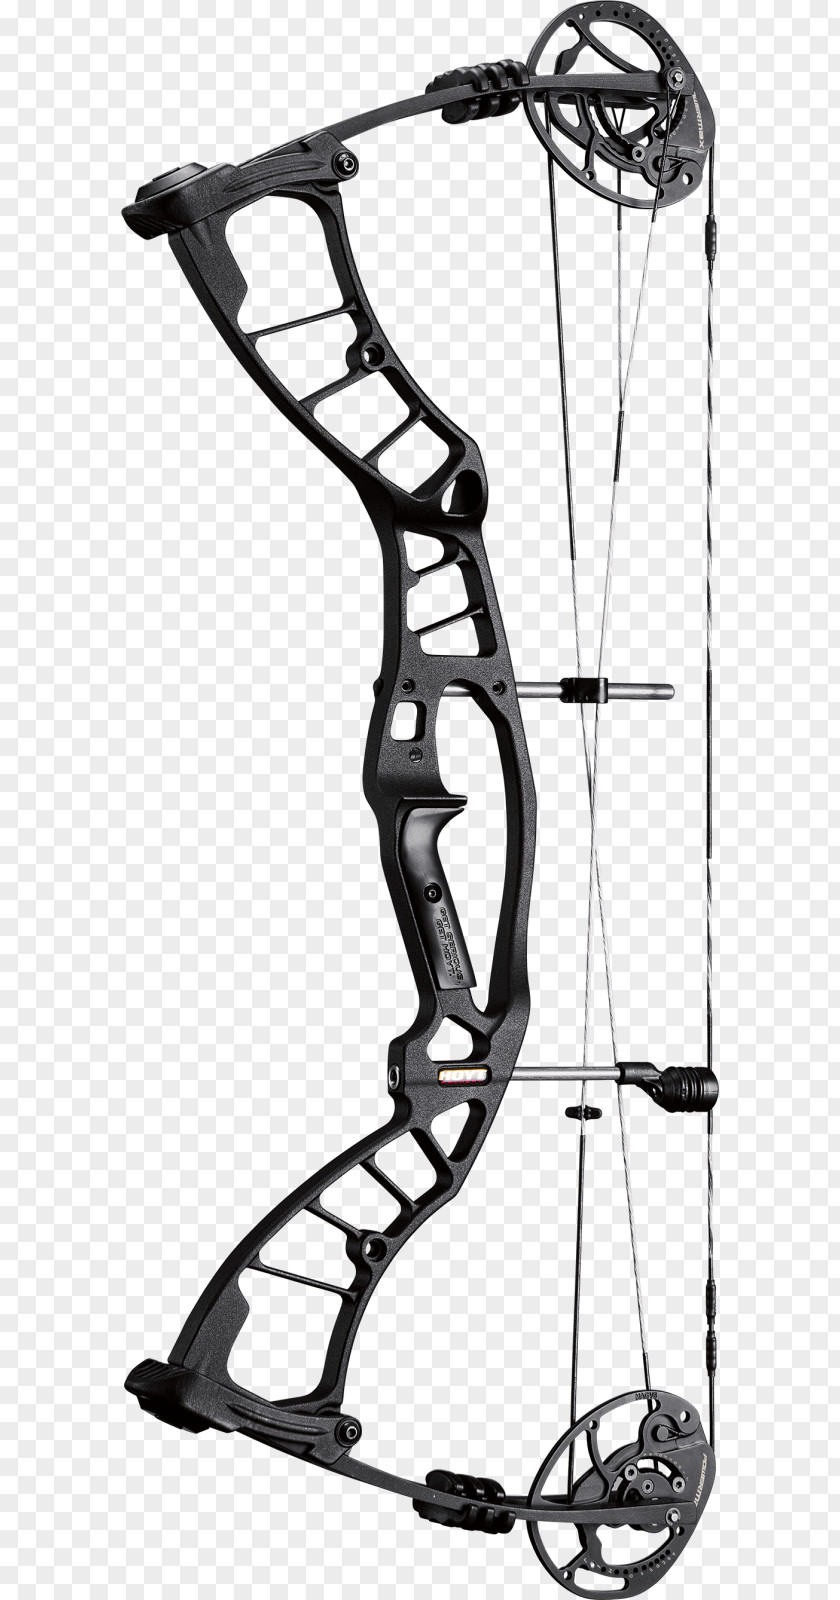 Bow Package Bowhunting Compound Bows Archery And Arrow PNG